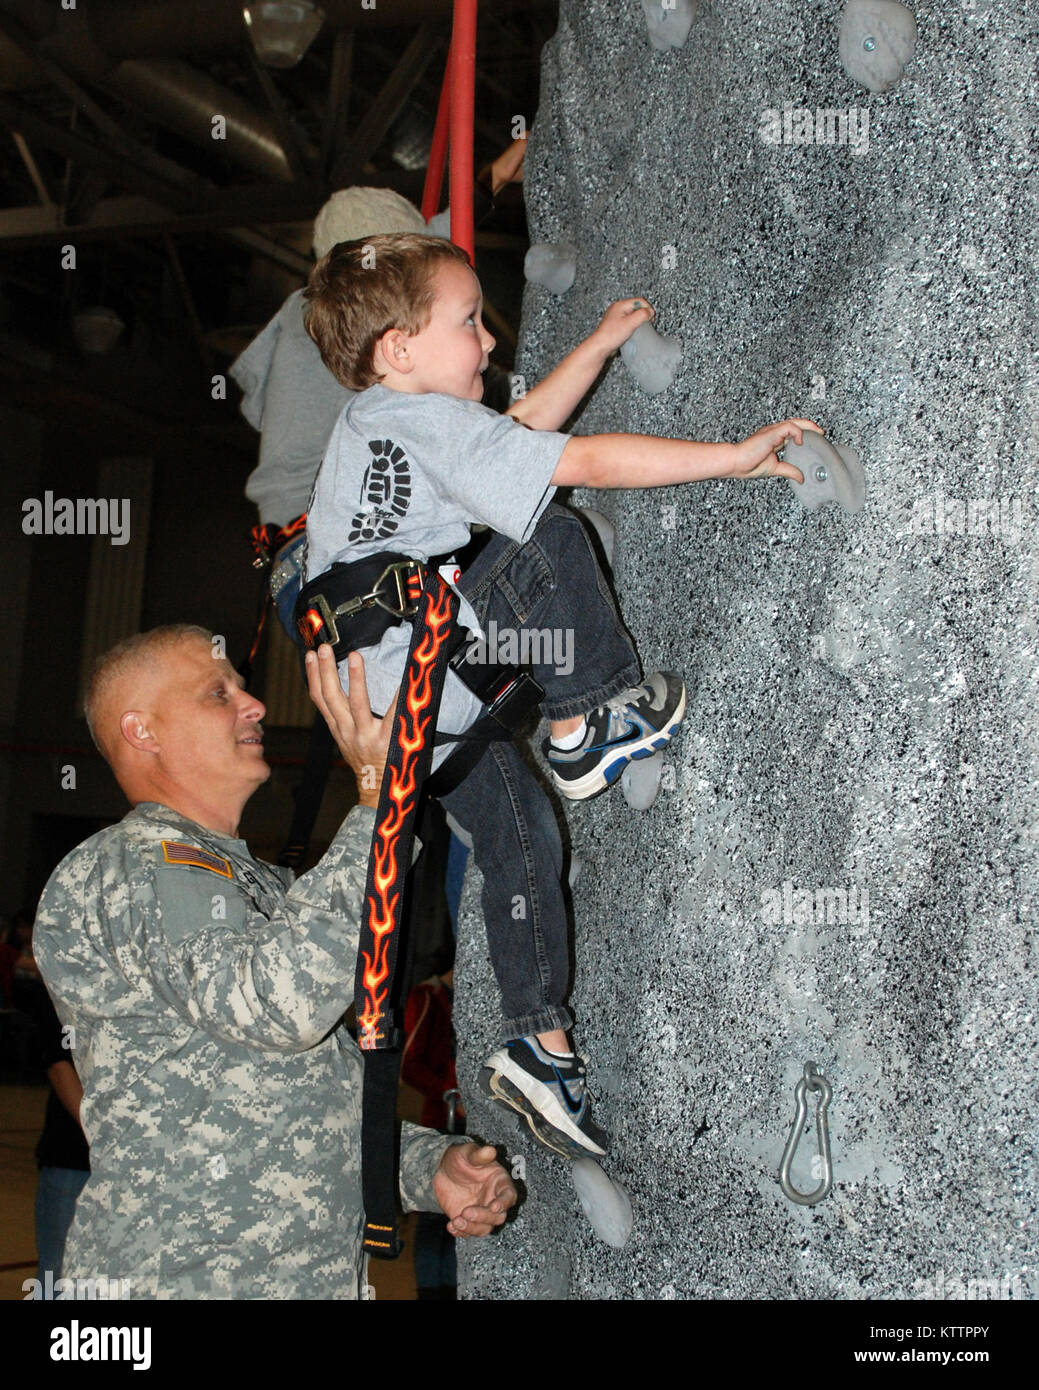 Latham -- New York Army National Guard Sgt. First Class David Girard gives Lucas Duff a boost onto a rock climbing wall at the National Guard headquarters on Nov. 11.     The Veterans Day event brought over 50 kids, from both military and non-military families from the Capital District area together to honor past and future hero's and support each other.  The youth assembled a quilt that will be sent to New York Army National Guard Soldiers serving overseas to remind them of their families back home.  Roughly 300 fabric quilt squares which include drawings and messages to Soldiers from childre Stock Photo